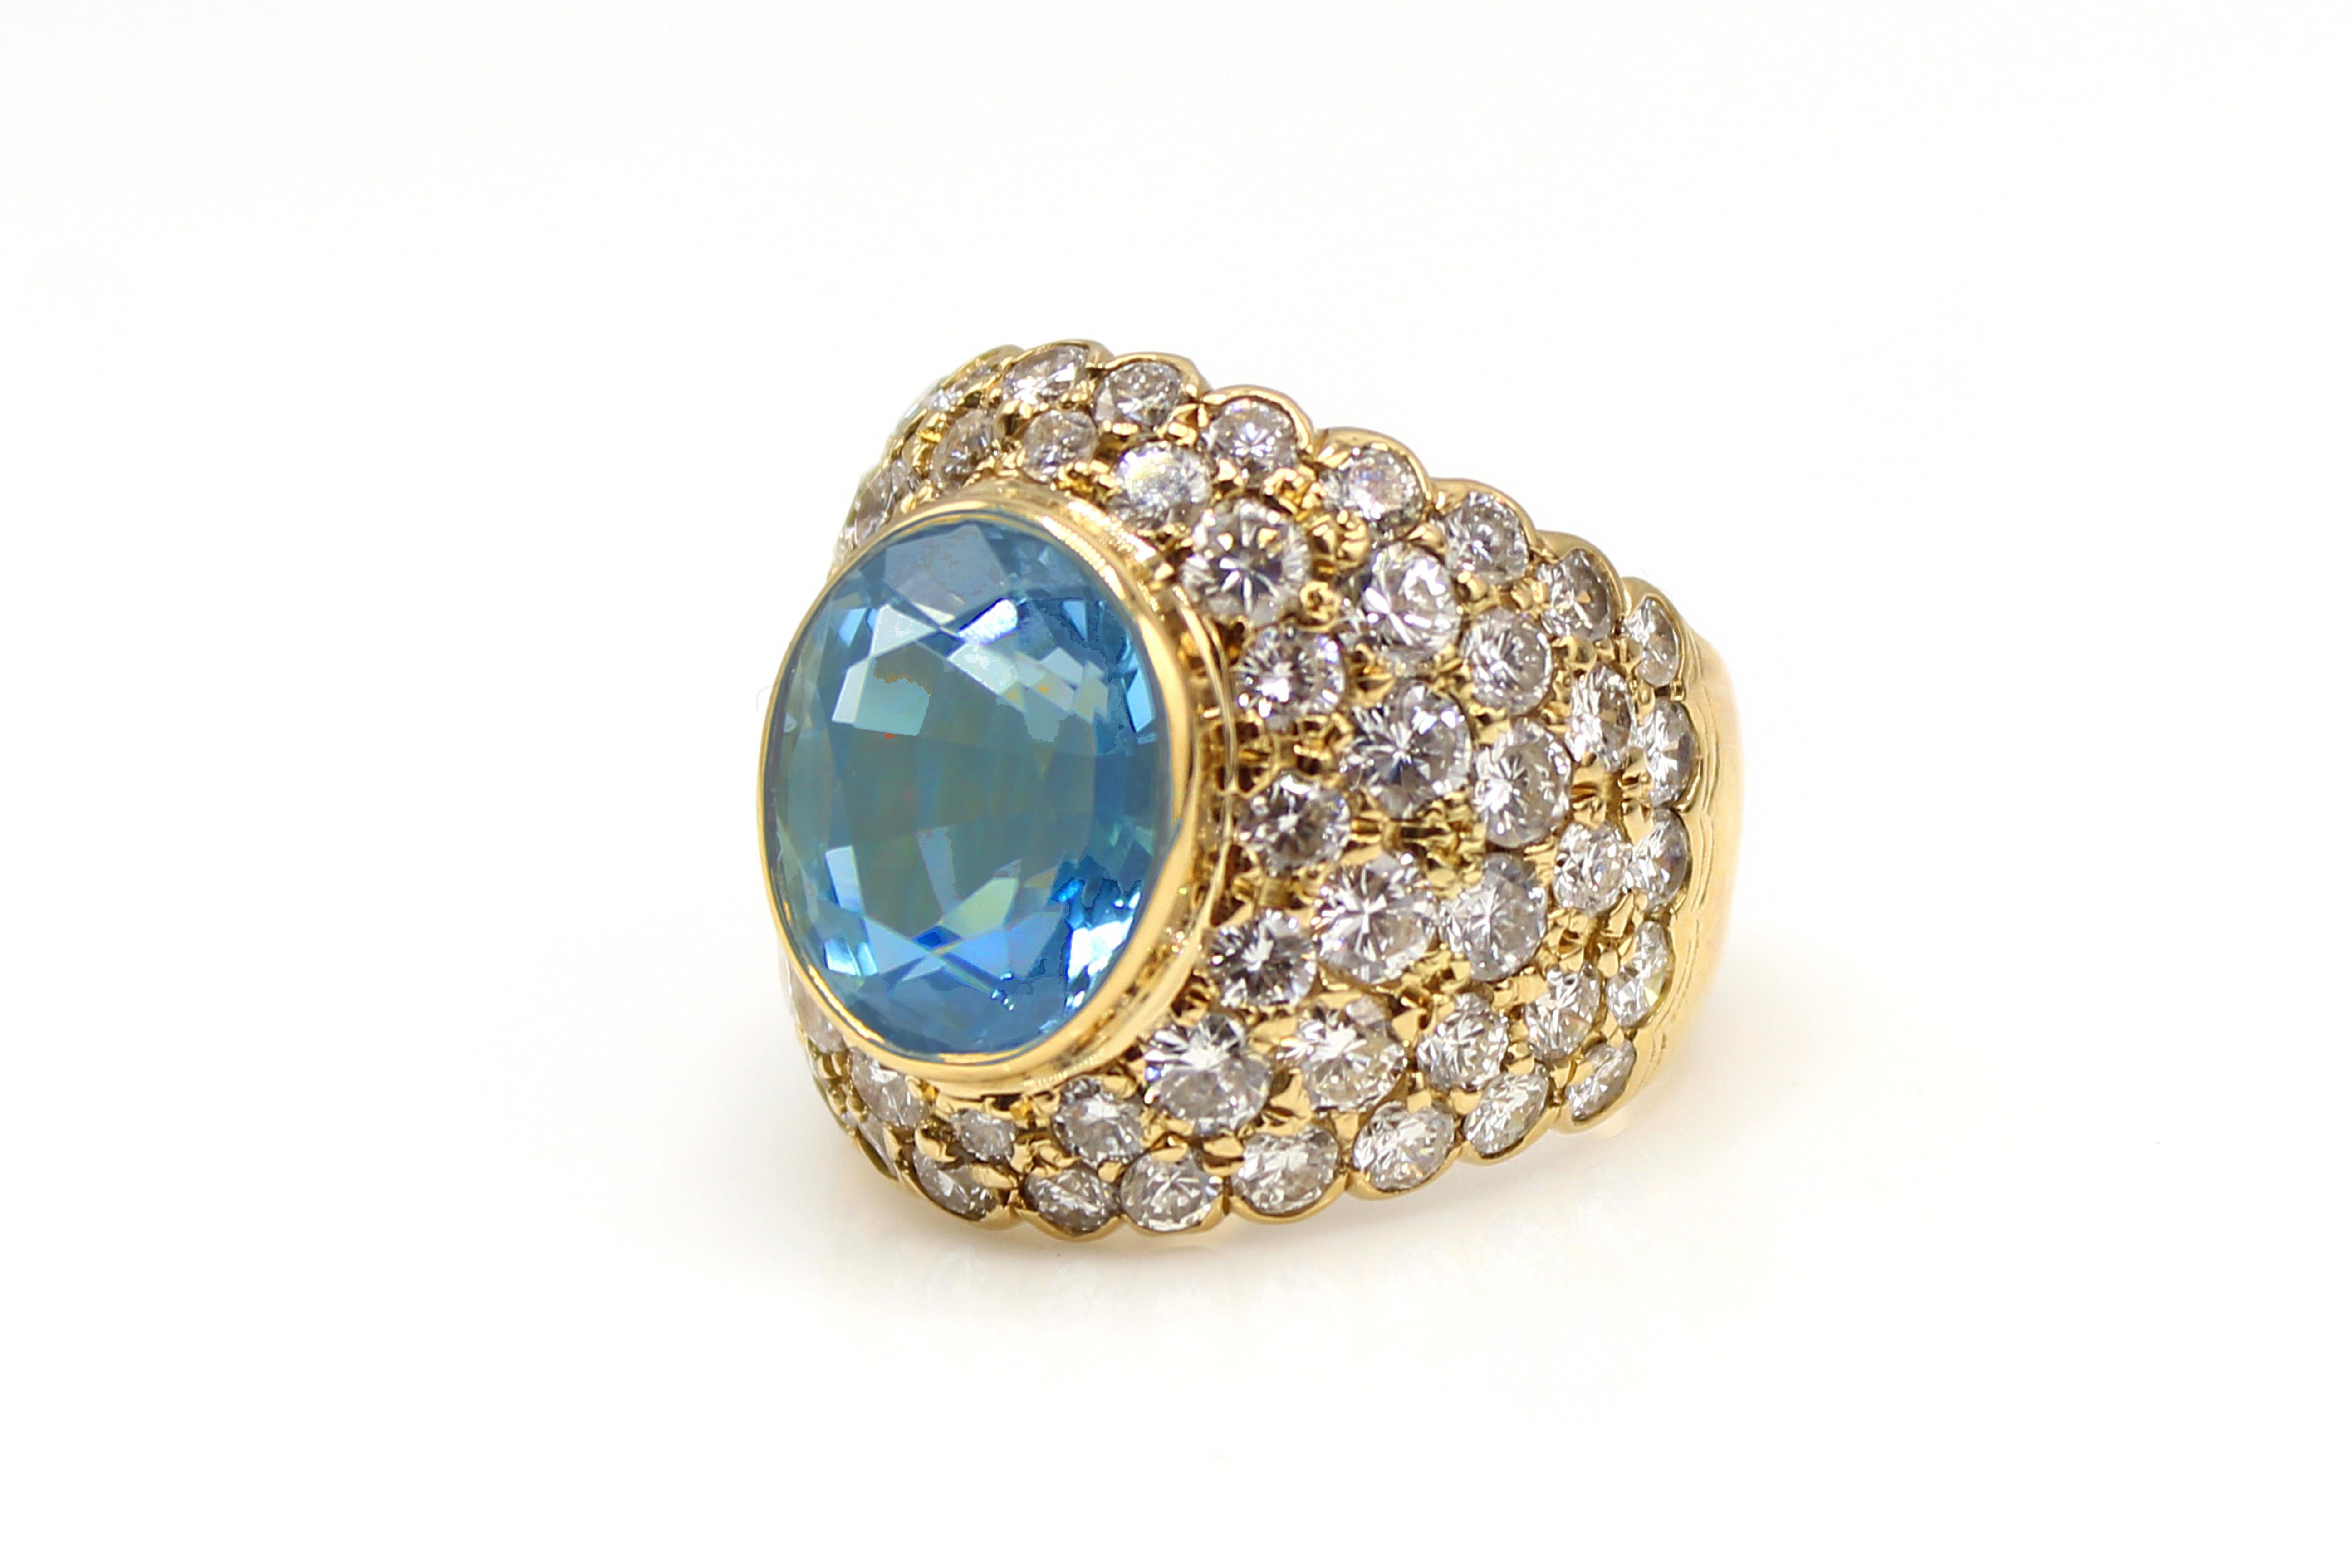 This uniquely designed, bold, and interesting ring from the 1980s was masterfully hand-crafted in 18-karat yellow gold. The wide half-band features a bezel-set Santa Maria color oval brilliant cut Aquamarine measured to weigh over 6 carats and has